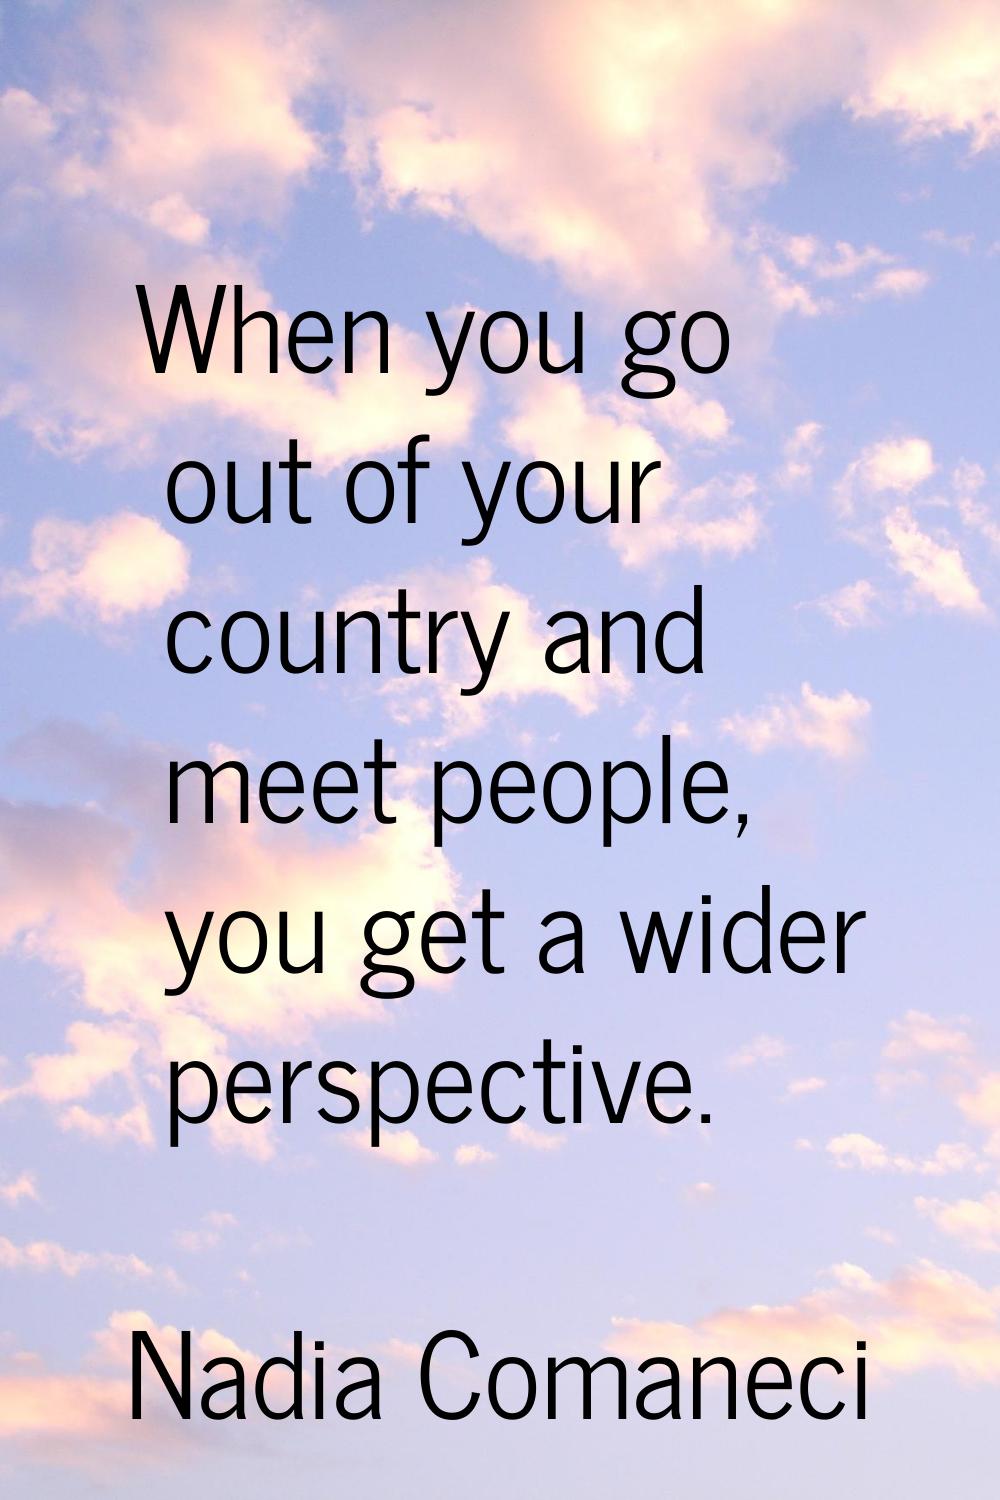 When you go out of your country and meet people, you get a wider perspective.